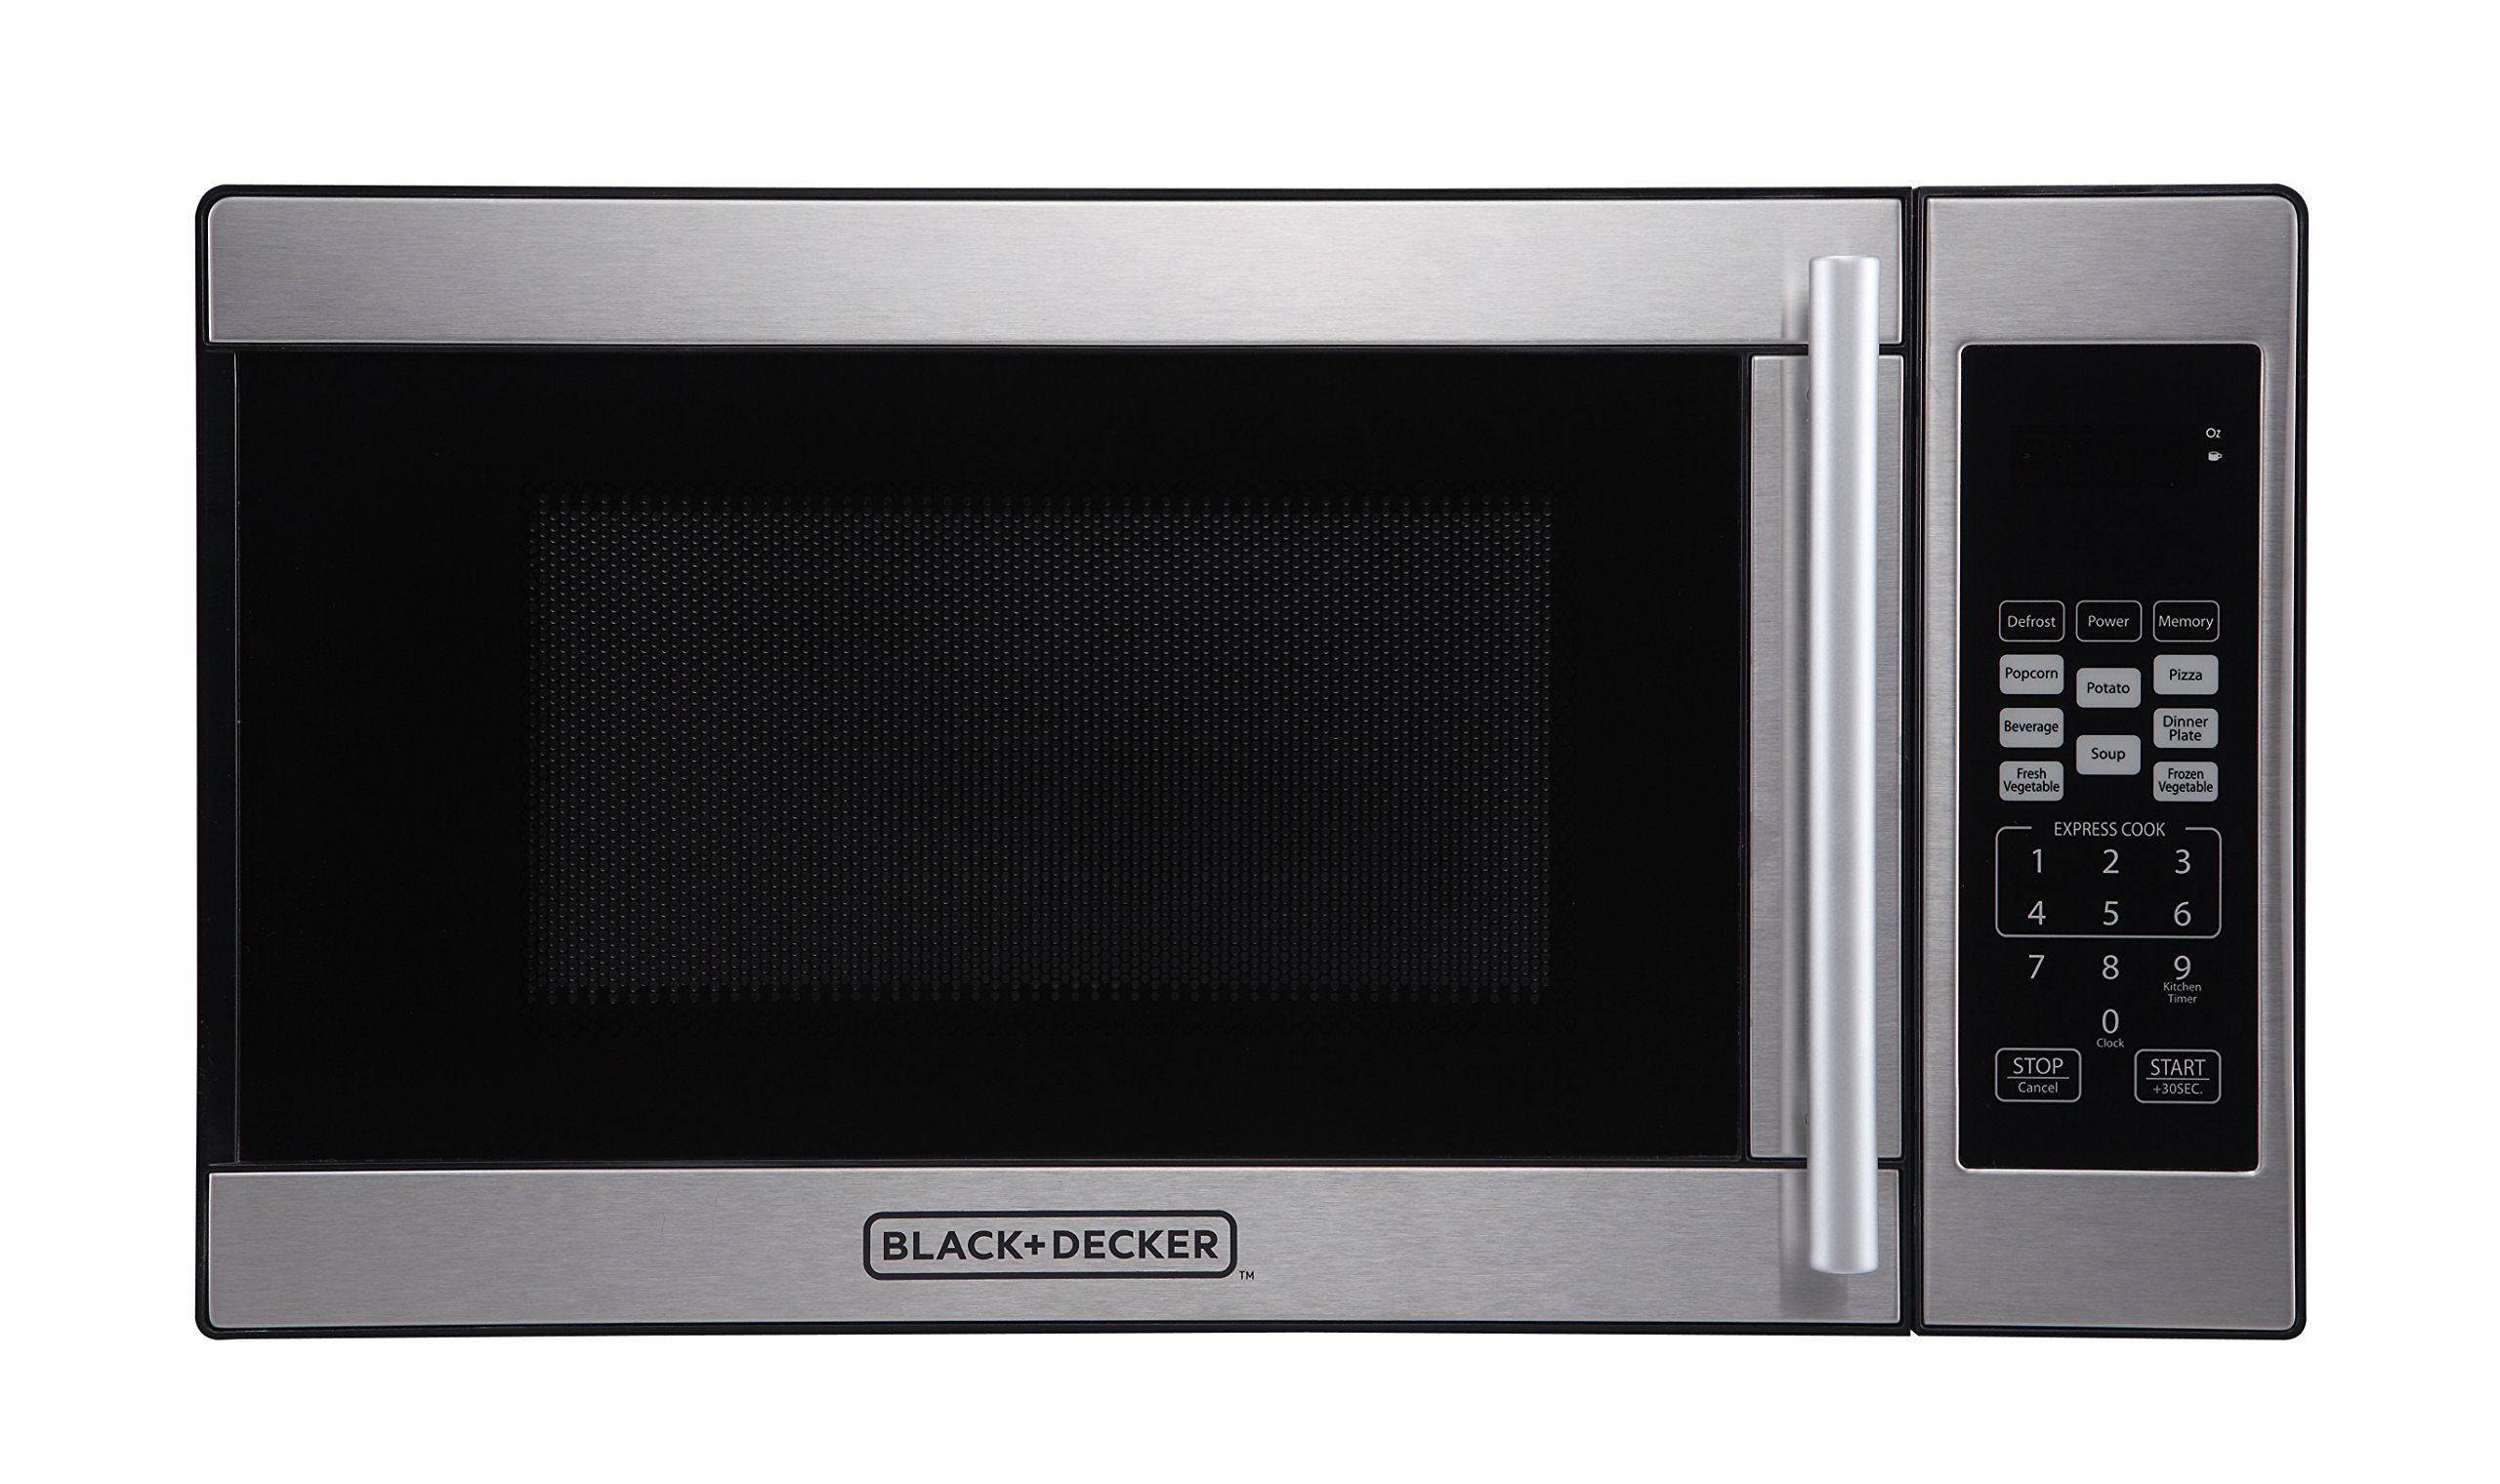 30% Off Microwaves at Target 7/3 + Free Shipping $55.99